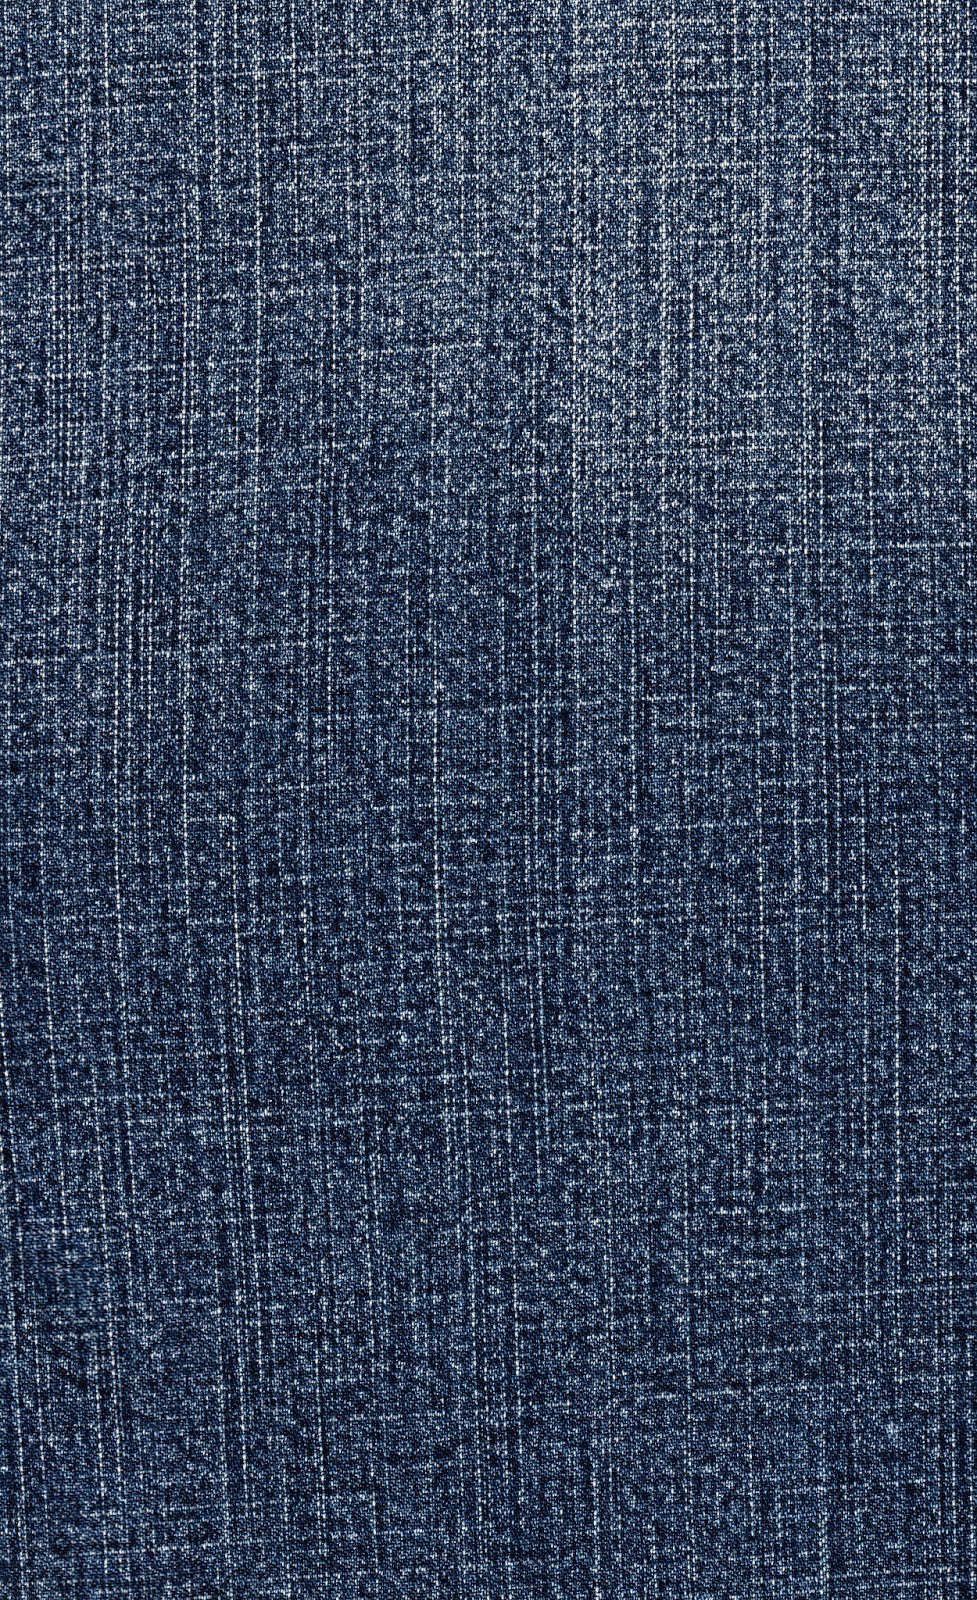 Meticulous Madness: Freebie Friday - Diverse Denim Textile Textures